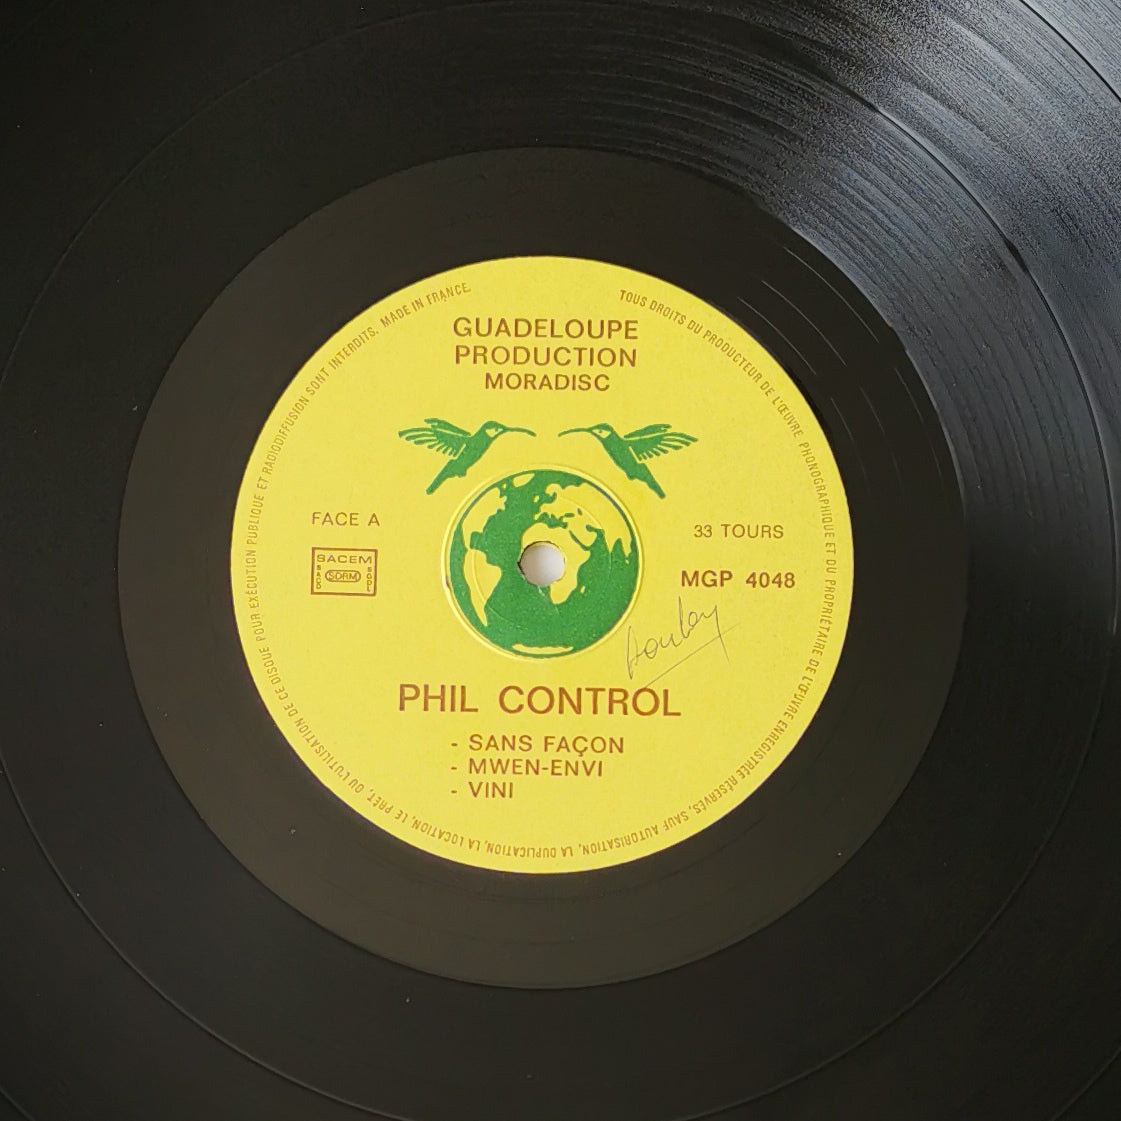 PHIL CONTROL - Chimin L'Anmou